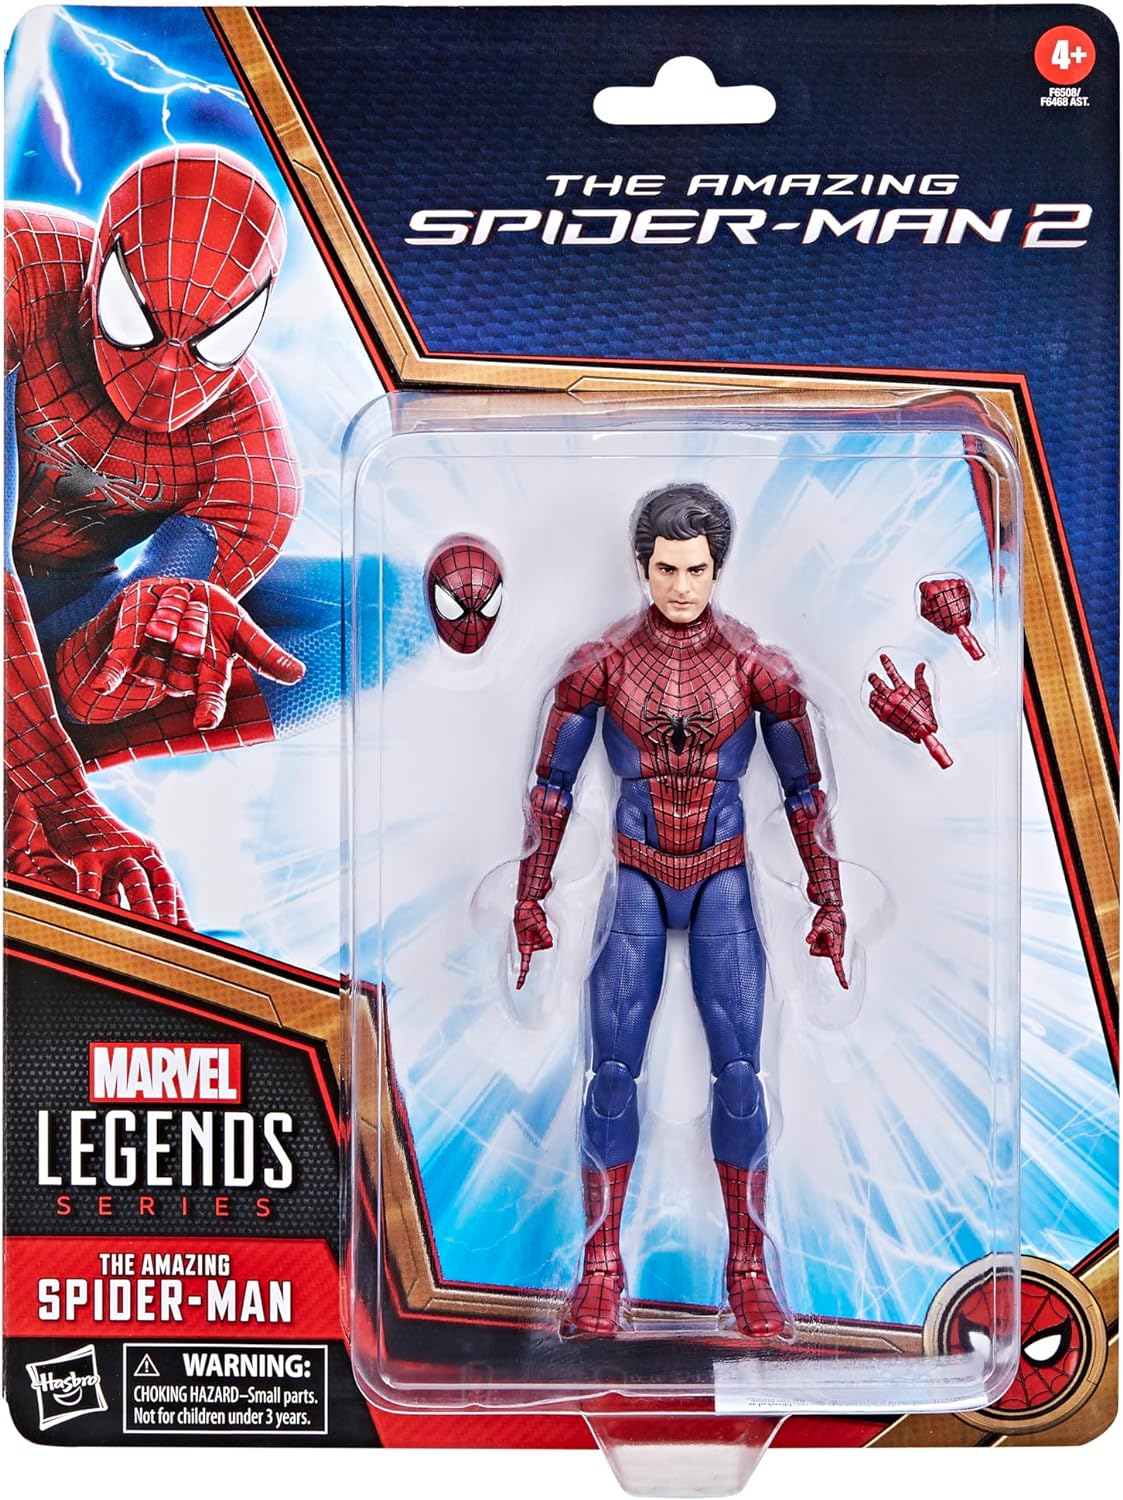 Marvel Legends the Amazing Spider-Man 2 The Amazing Spider-Man 6-Inch Action Figure 正規品画像